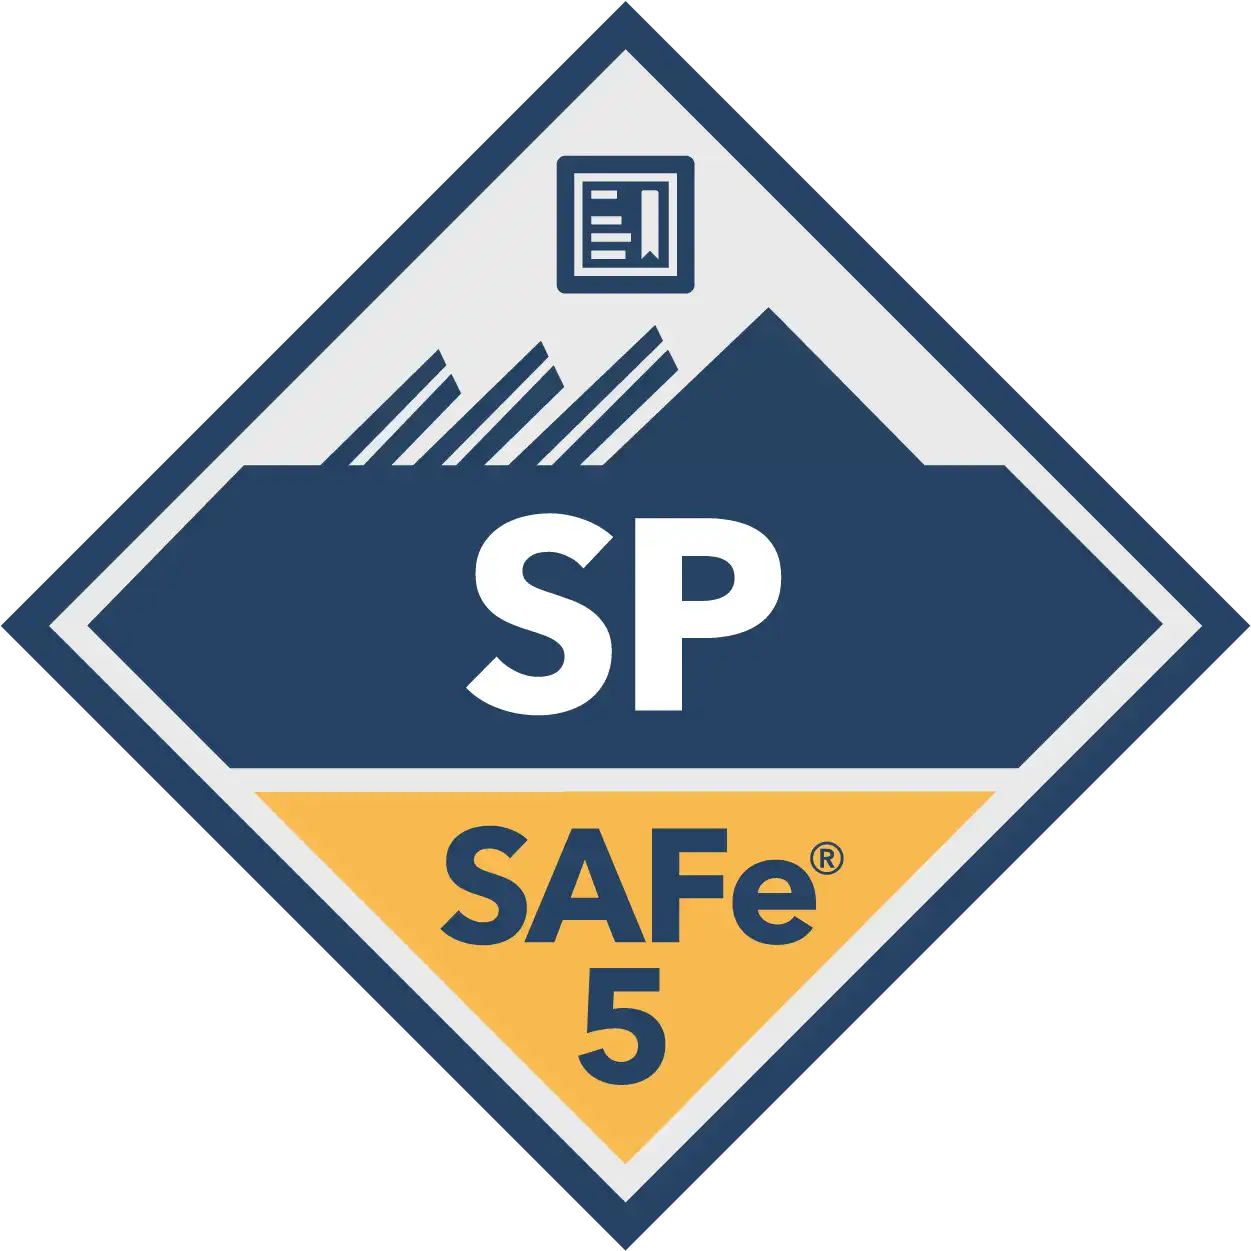 Certified SAFe® 5 Practitioner,A Certified SAFe® 5 Practitioner (SP) is a SAFe team member professional responsible for using Scrum, Kanban, and XP in a SAFe environment. Key areas of responsibility include planning Program Increments and iterations, breaking requirements into stories, developing incrementally with built-in quality, demoing value at a team and program level, and problem solving impediments to drive relentless improvement.